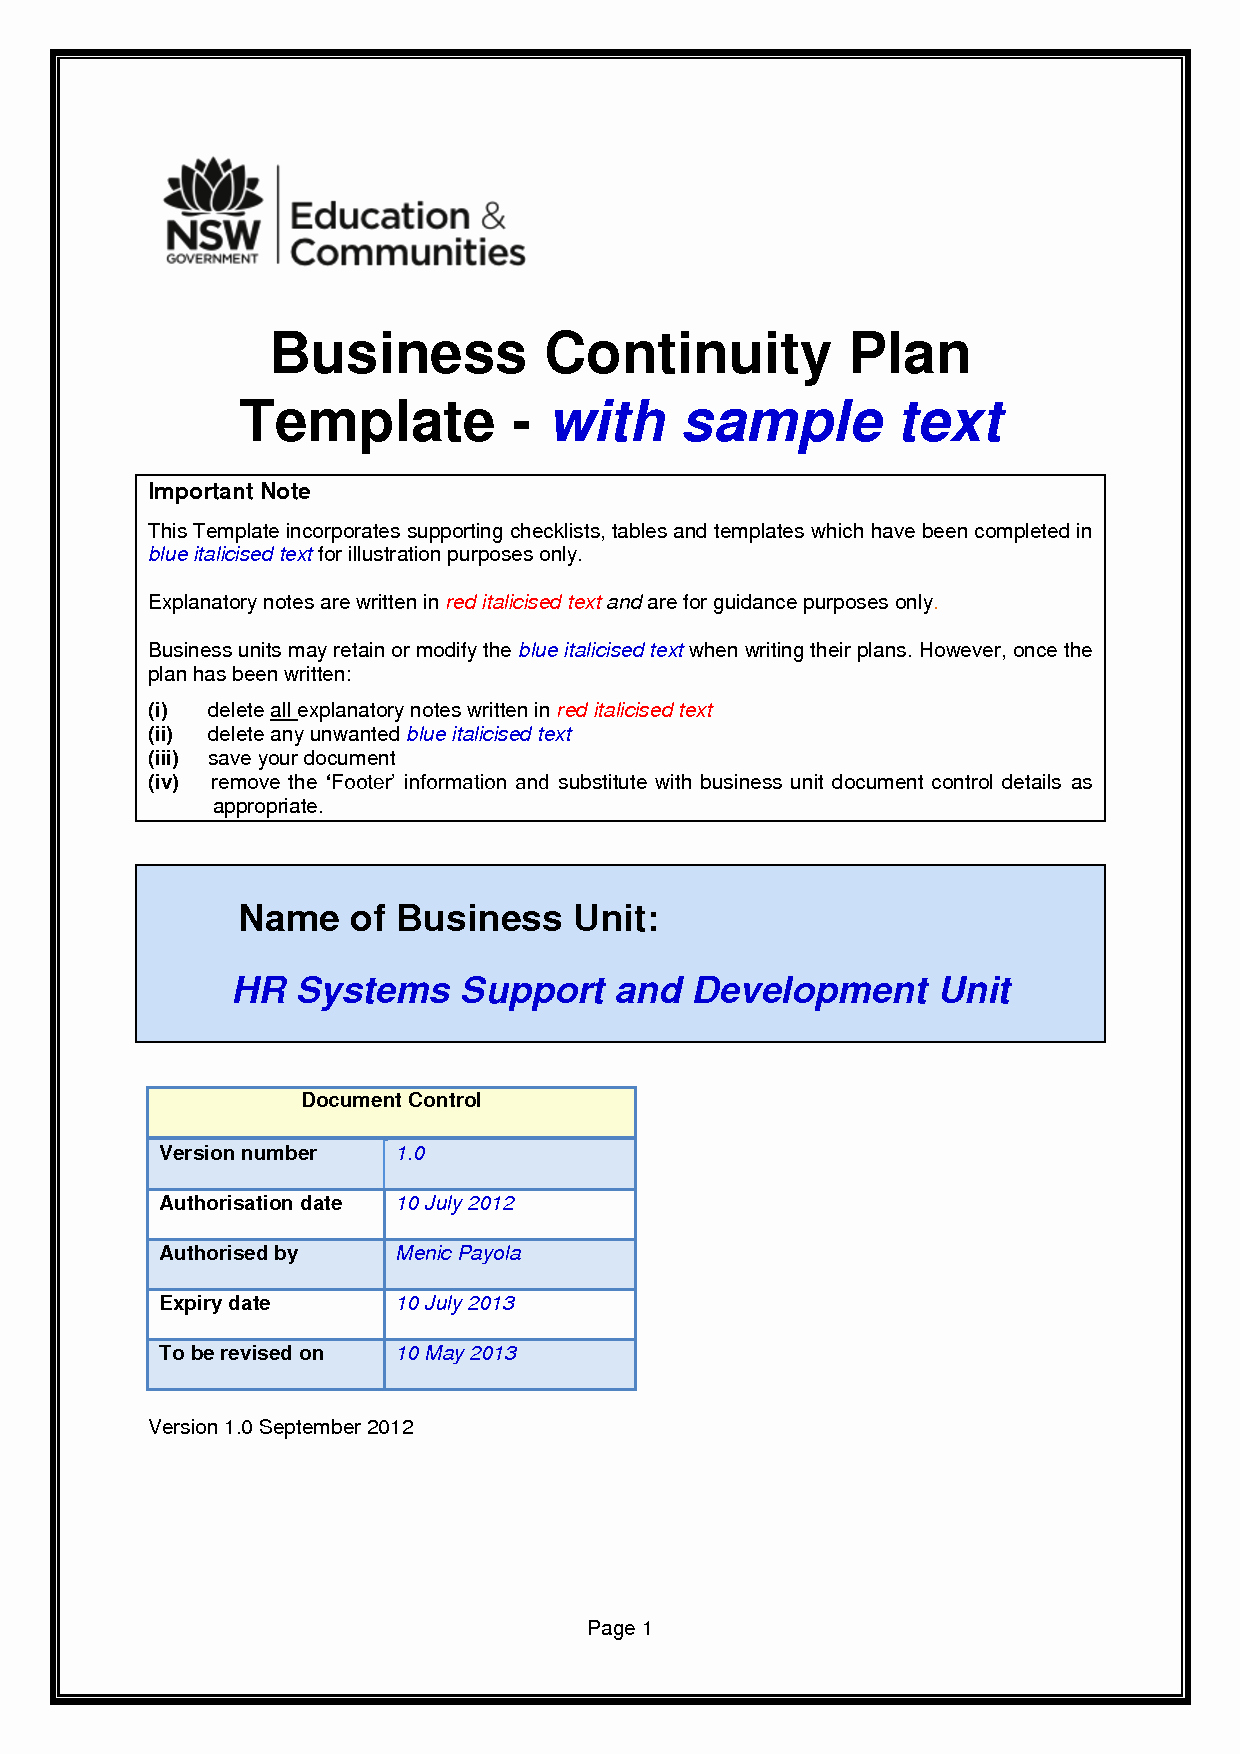 Business Continuity Plan Template New Business Continuity Plan Template